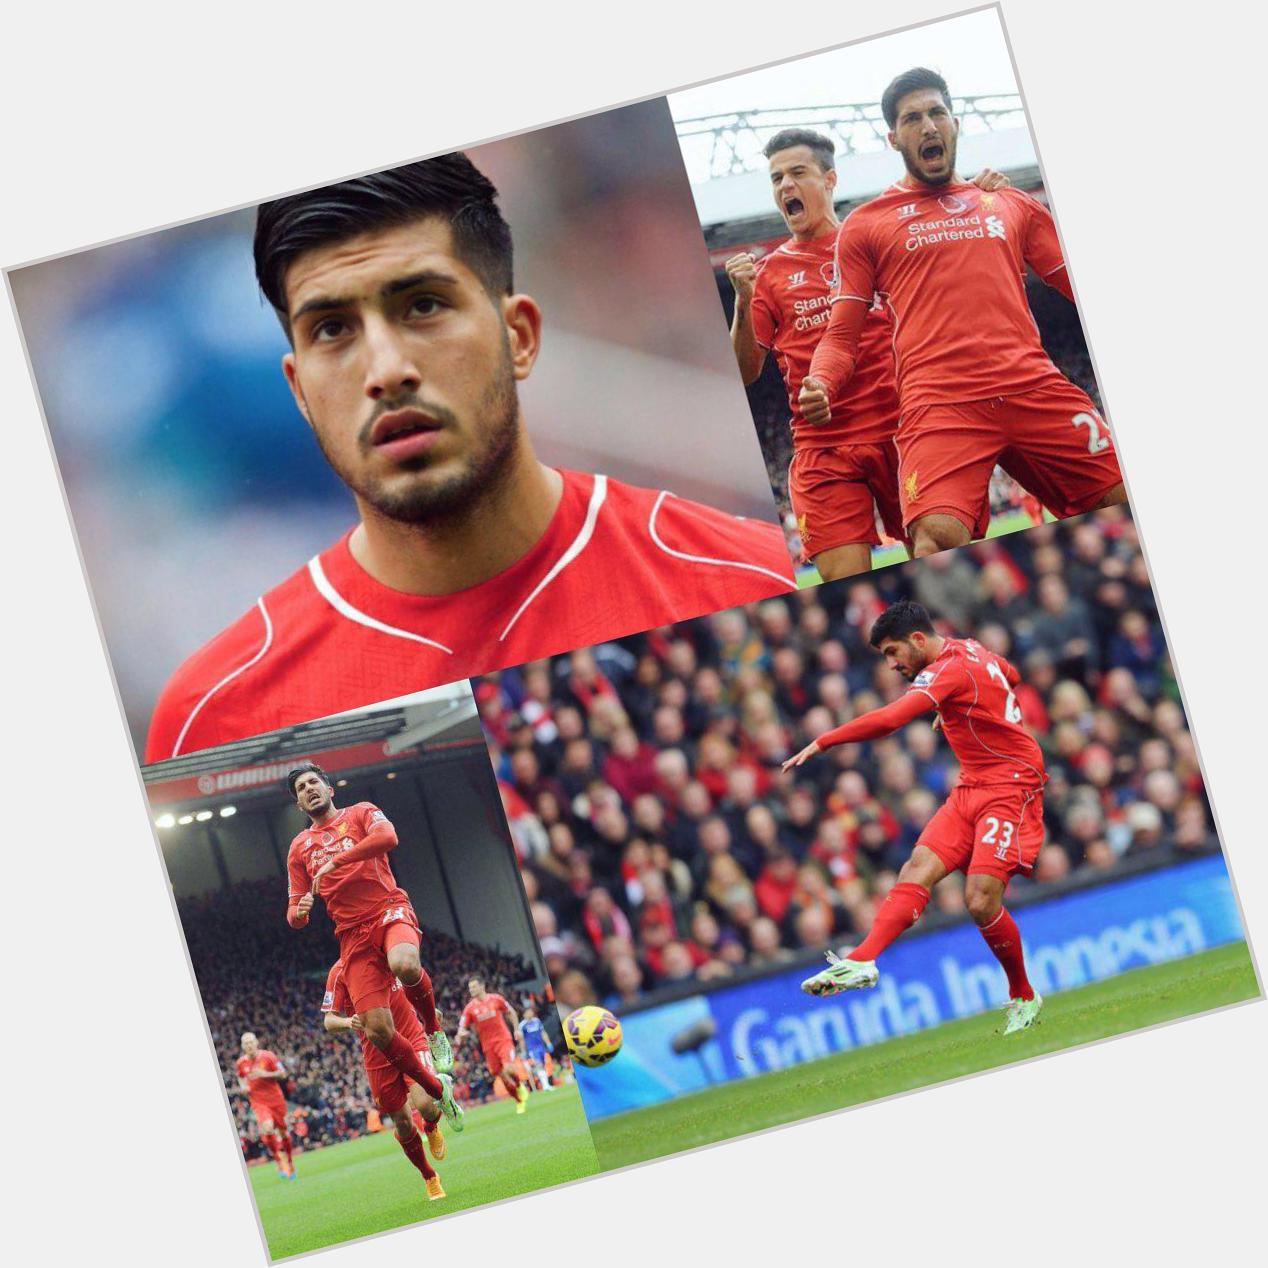 Happy 21st Birthday to Emre Can! 